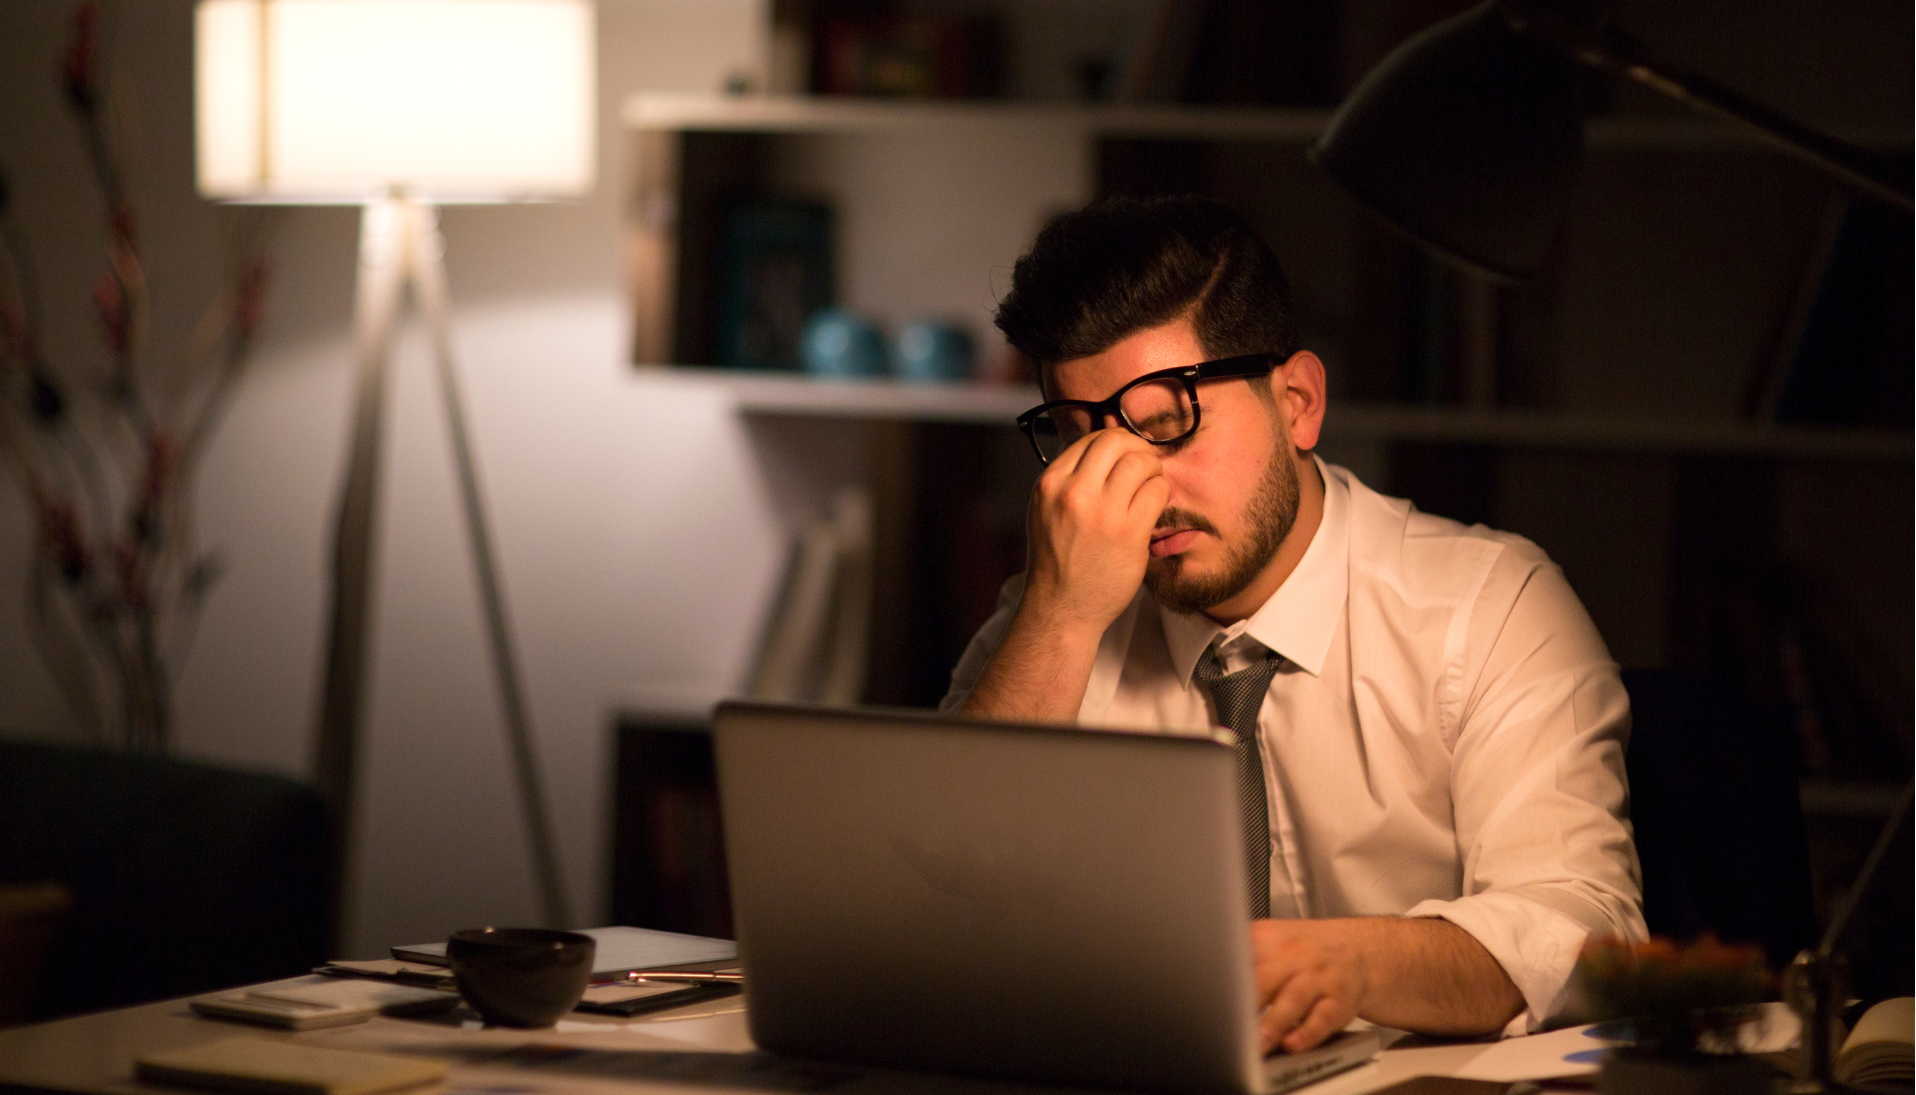 A remote worker feels the negative effects of work from home: depression, burnout & stress